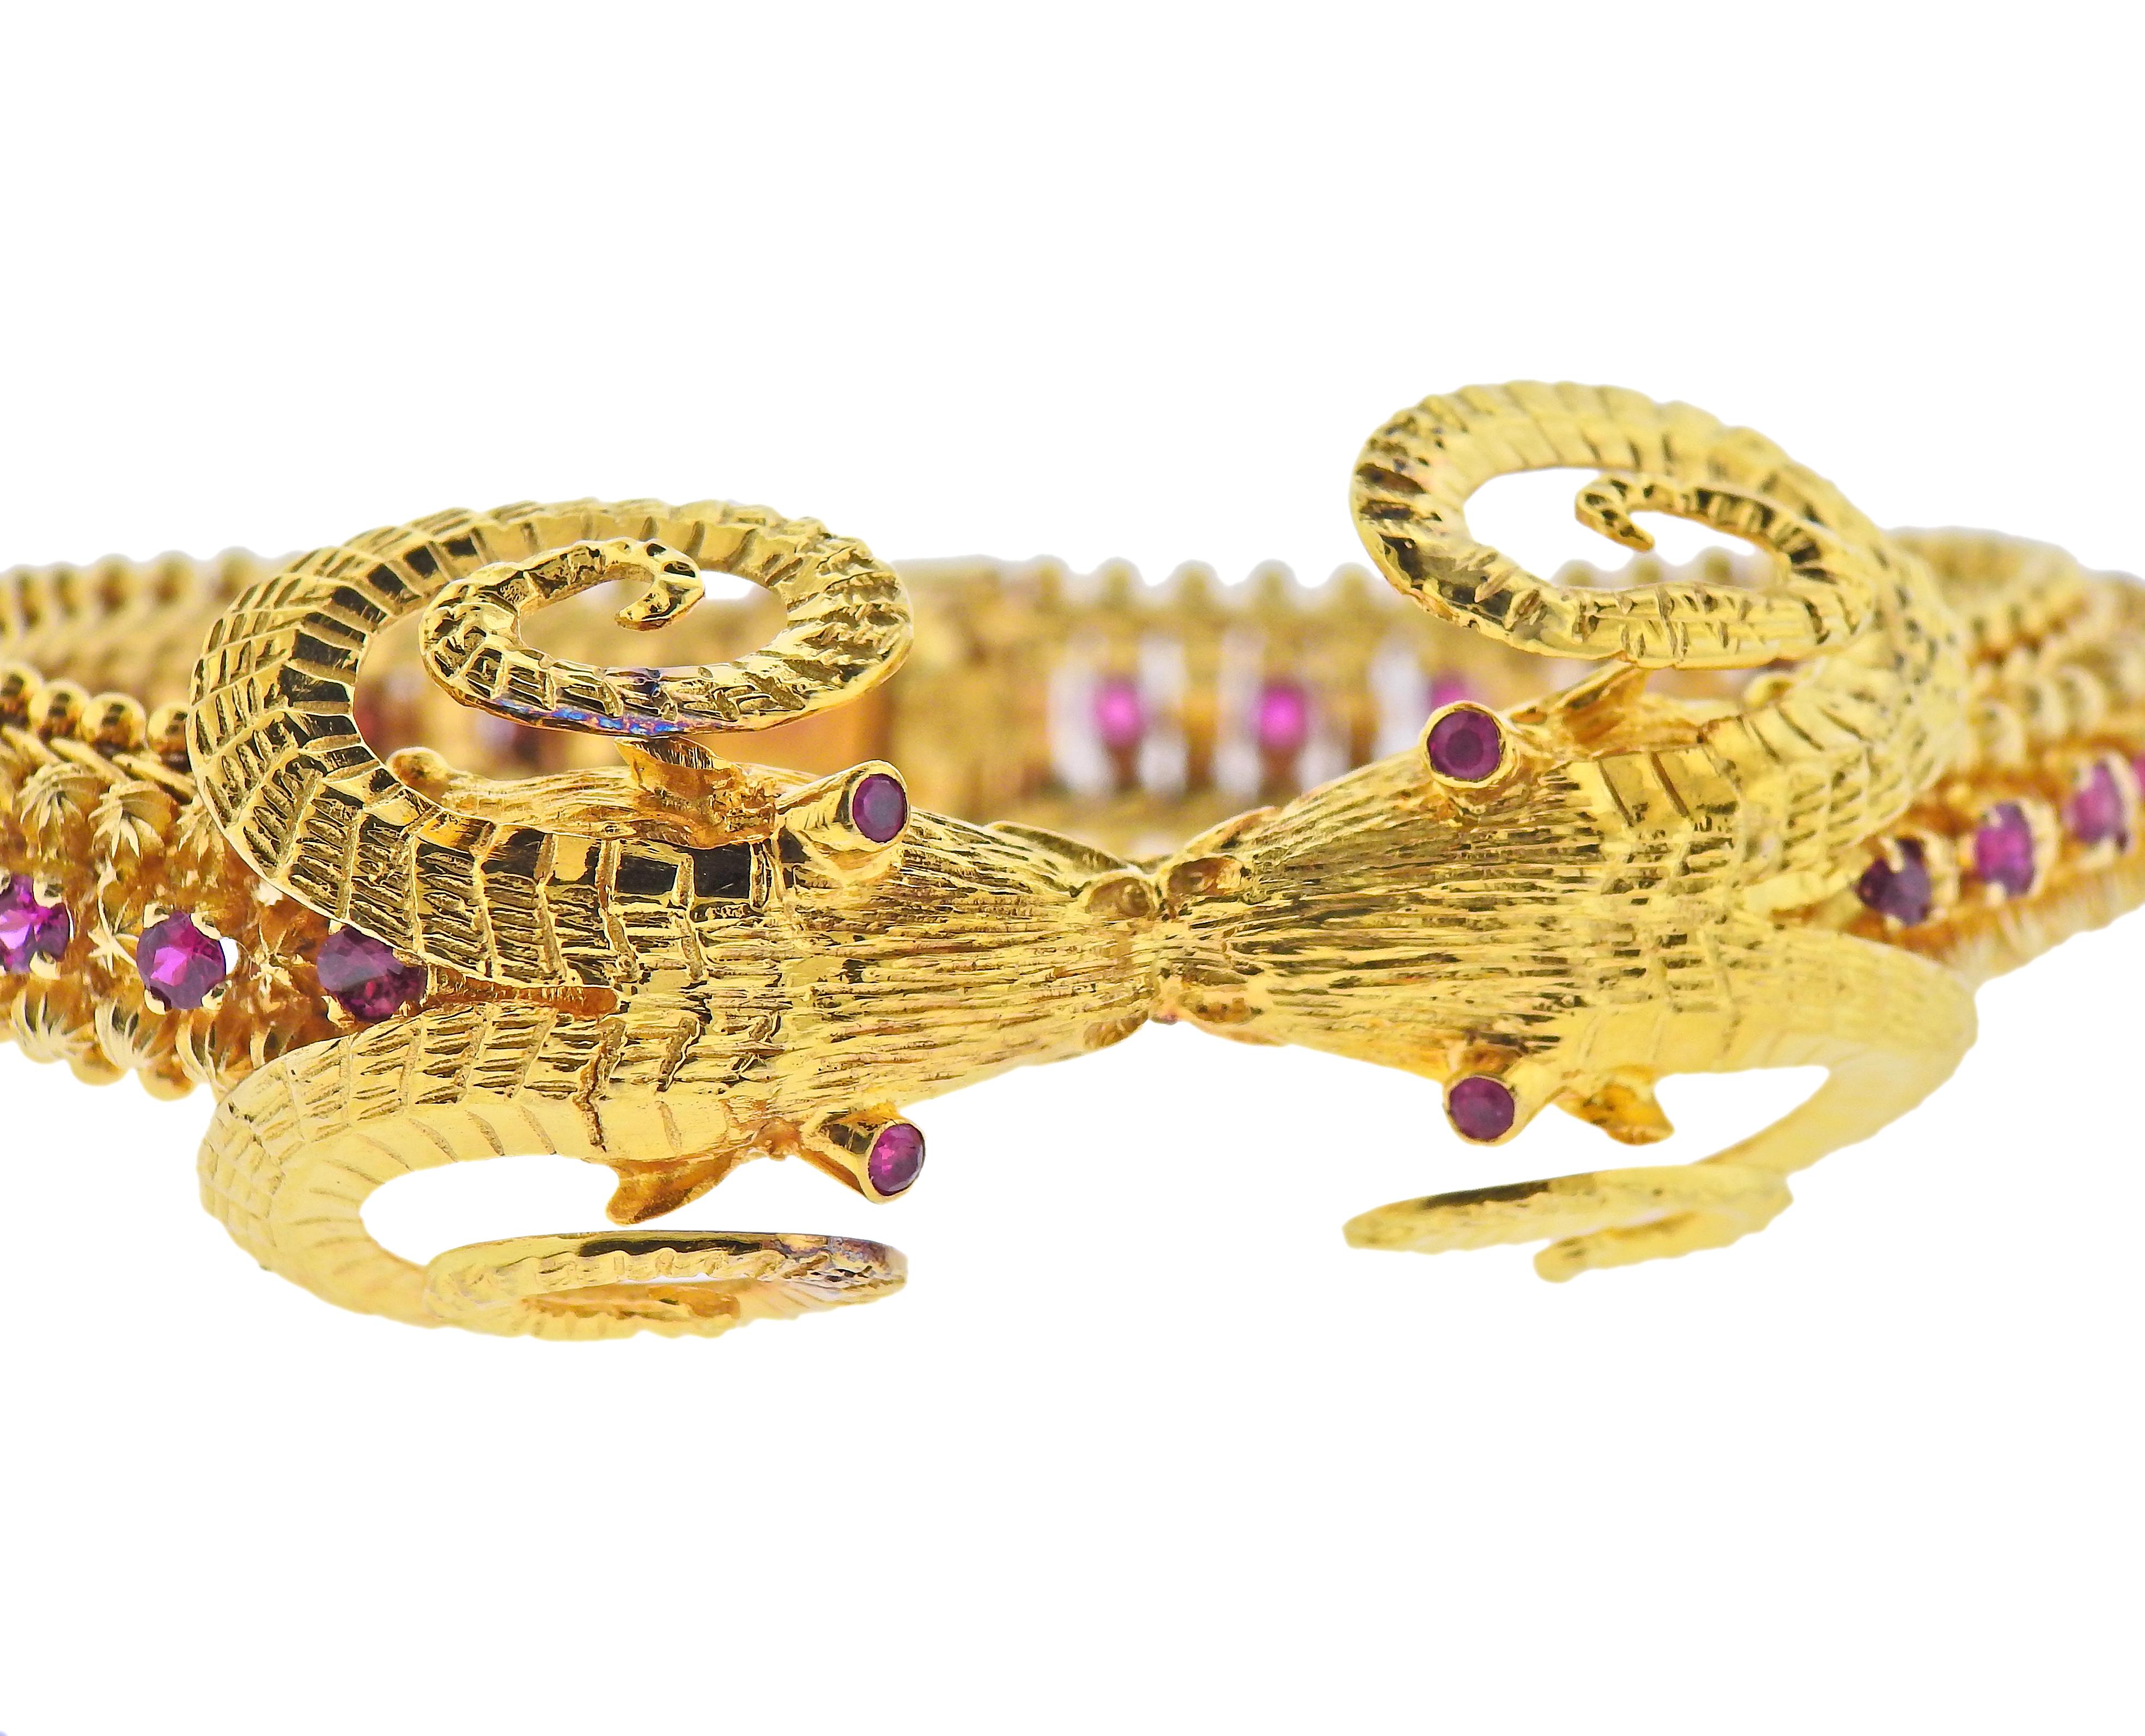 Greek made, 18k yellow gold bracelet, featuring two connecting ram's heads, decorated with rubies. Bracelet is 7